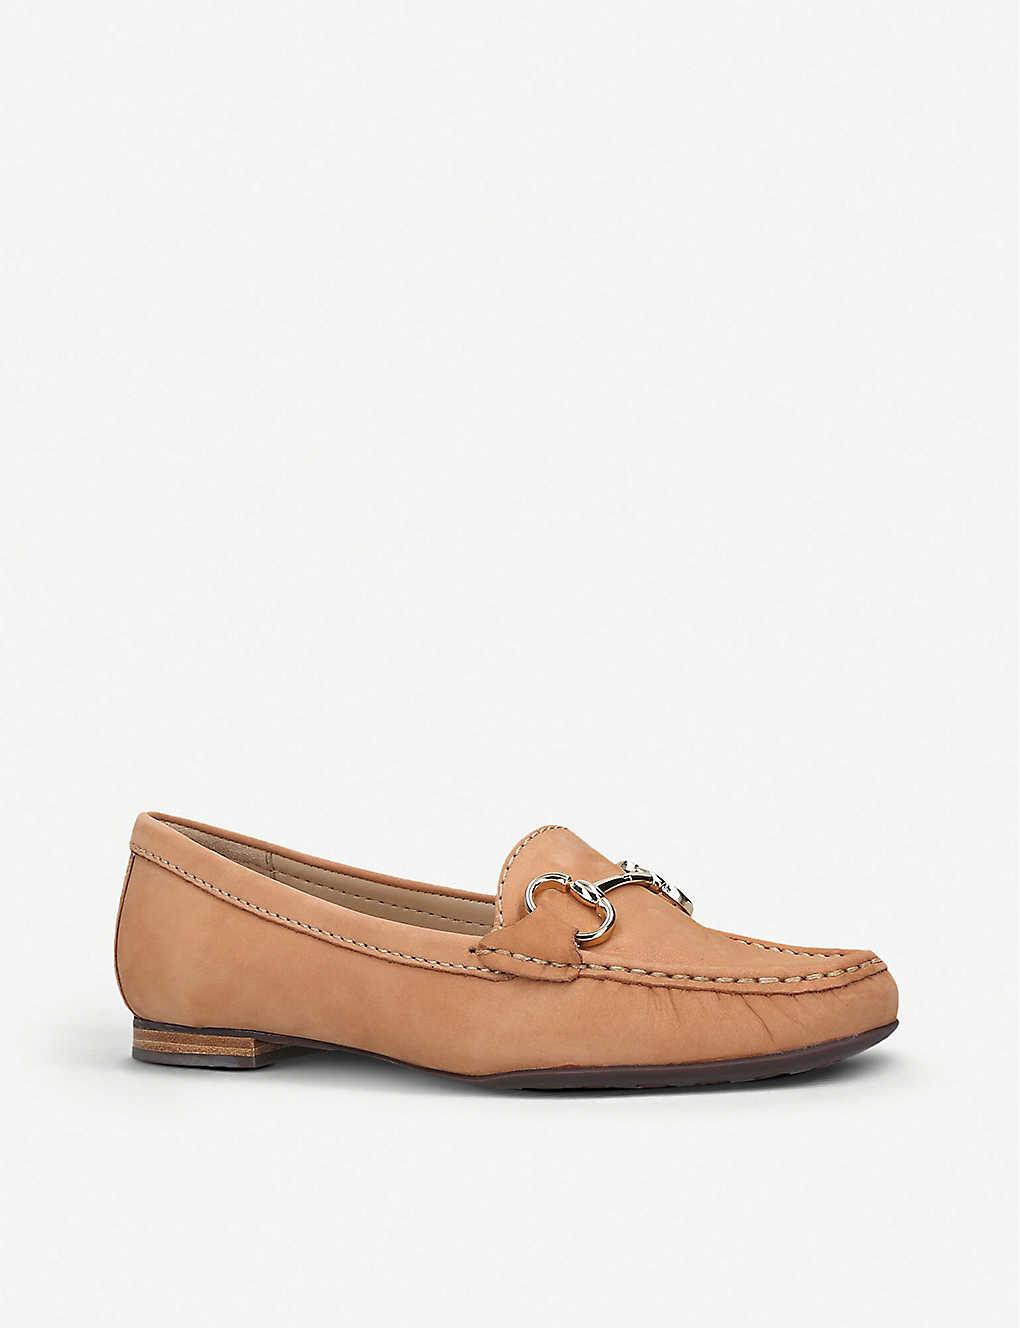 Carvela Kurt Geiger Leather Flat Loafers in Tan (Brown) - Lyst